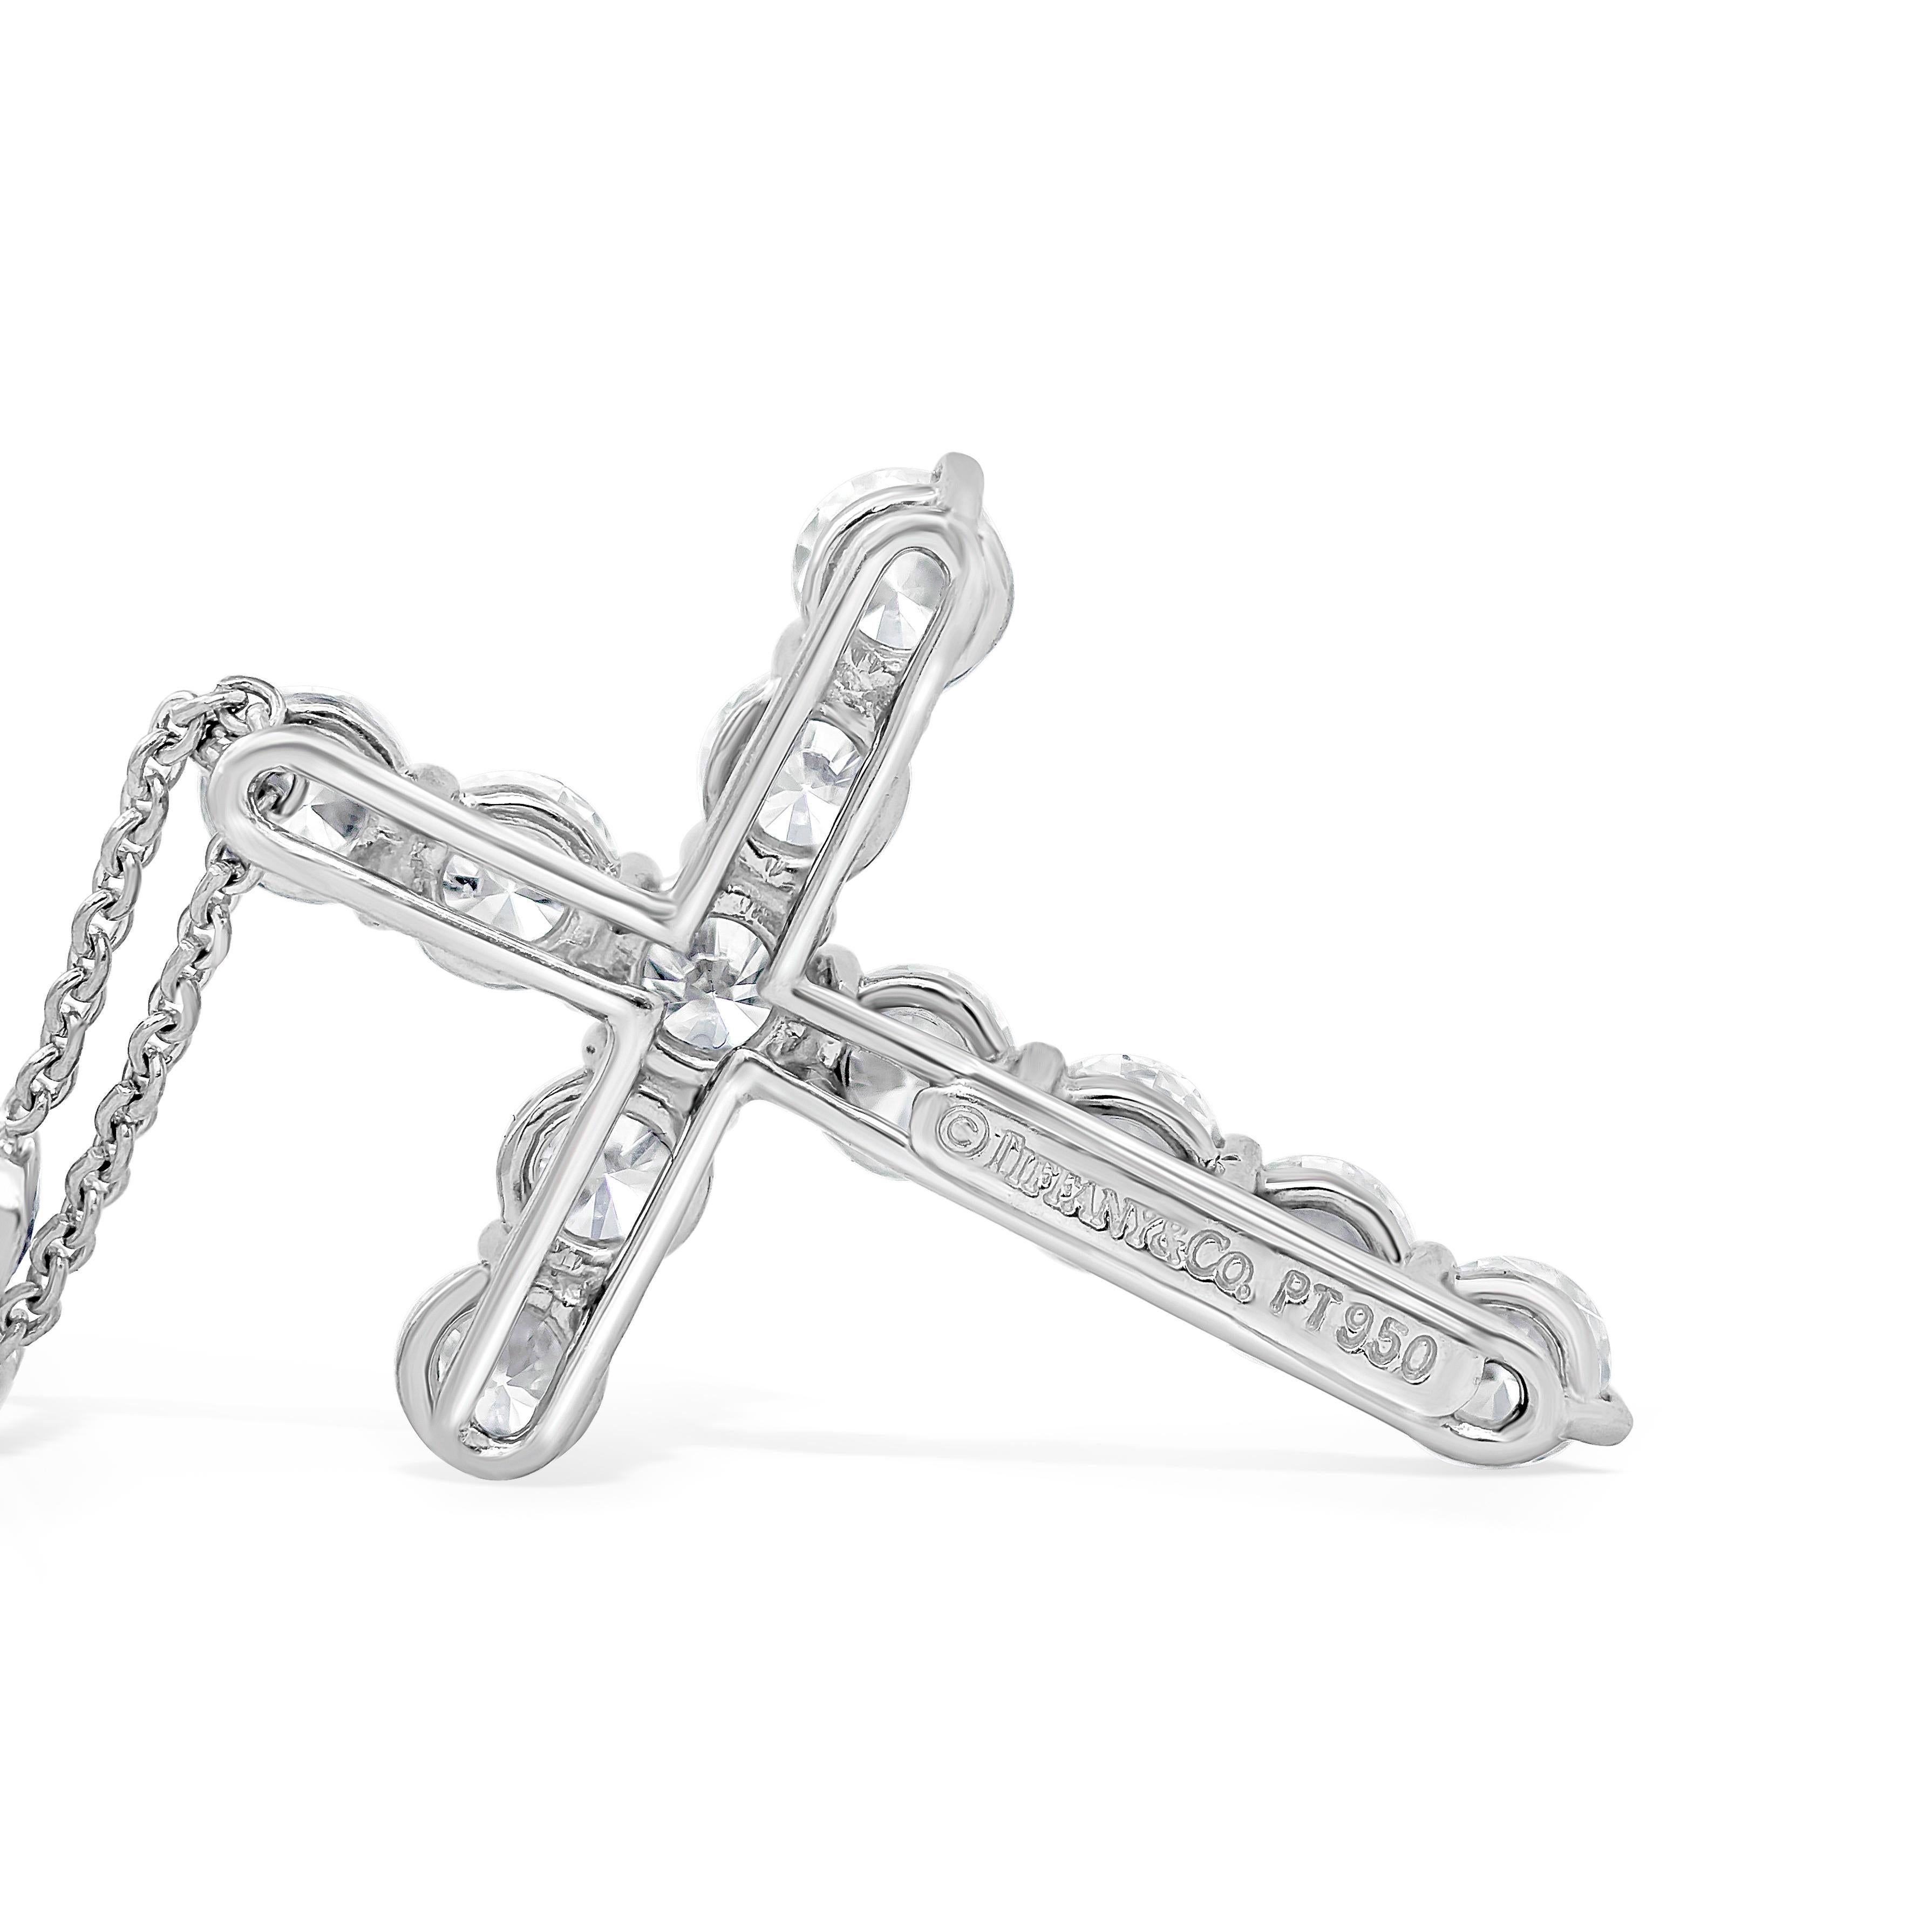 This is a very brilliant and gorgeous piece made and signed by Tiffany & Co. Showcases a 2 carat diamond cross suspended on an elegant diamonds by the yard necklace. The diamonds by the yard necklace is set with 2.75 carats total of diamonds.